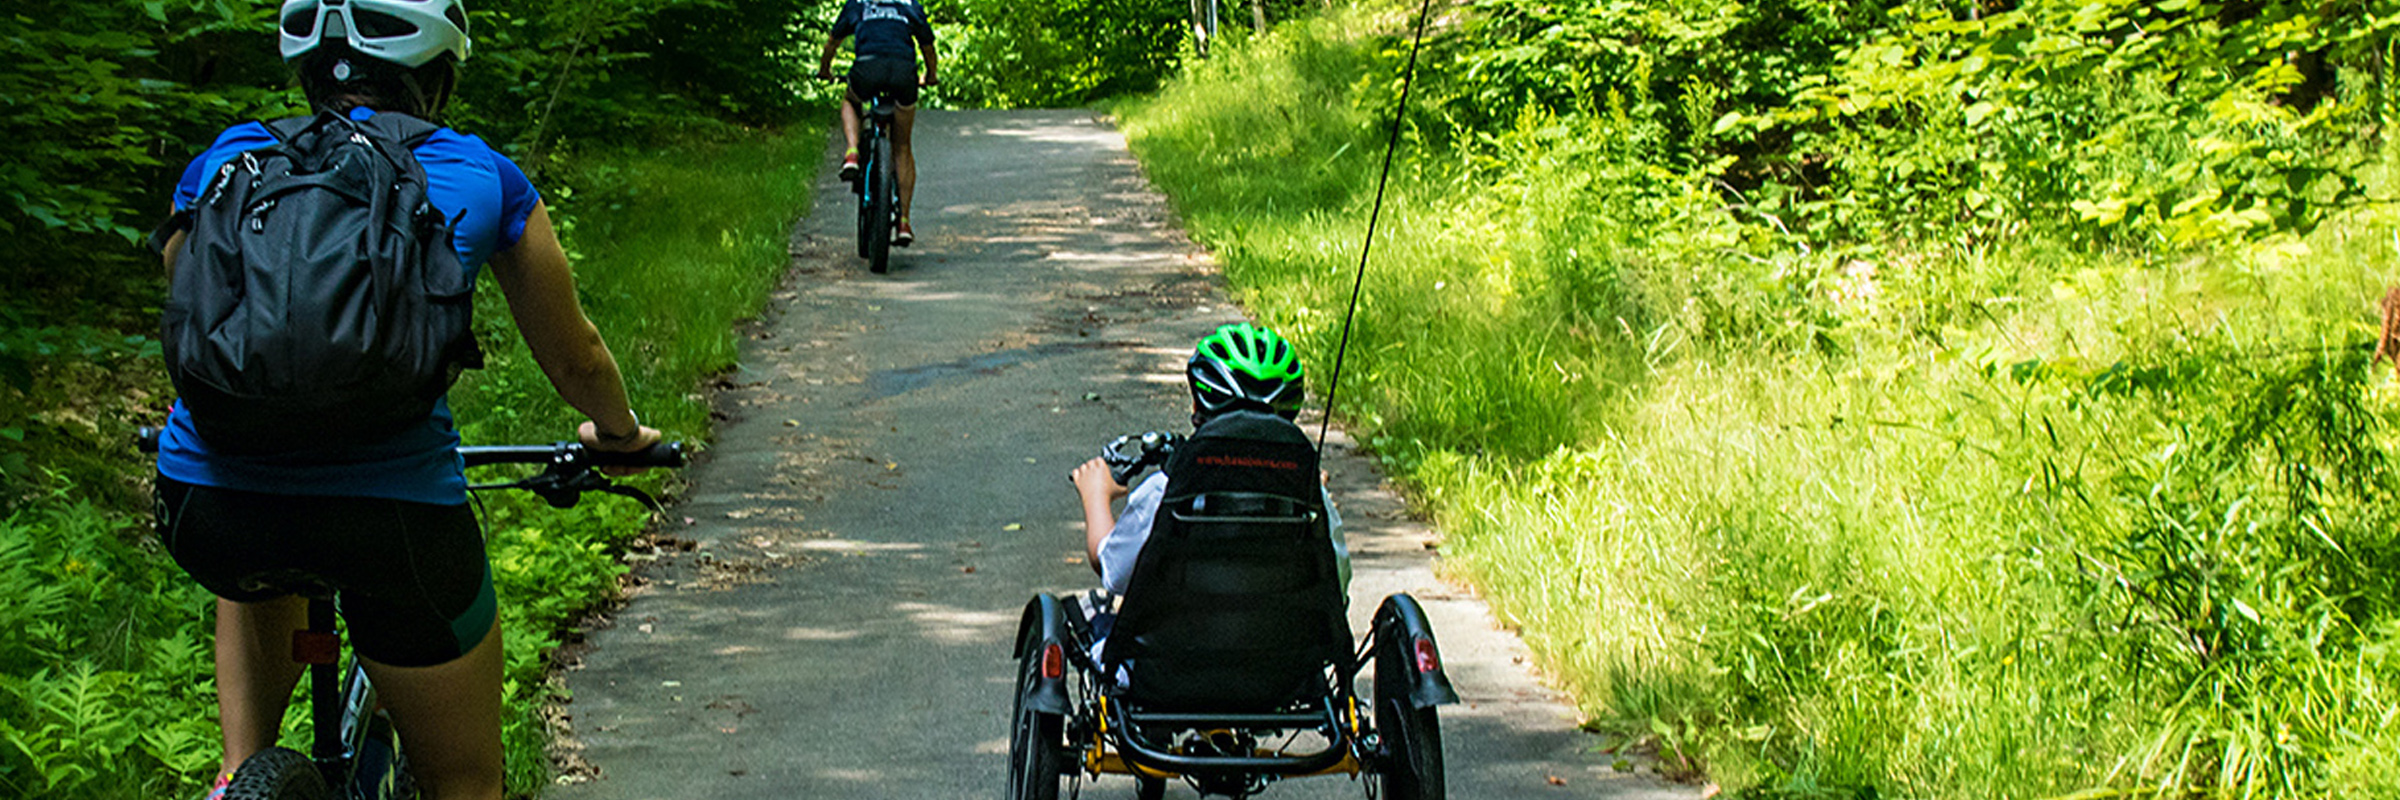 Two individuals on upright bikes and one individual on a recumbent bike riding down a bike path.